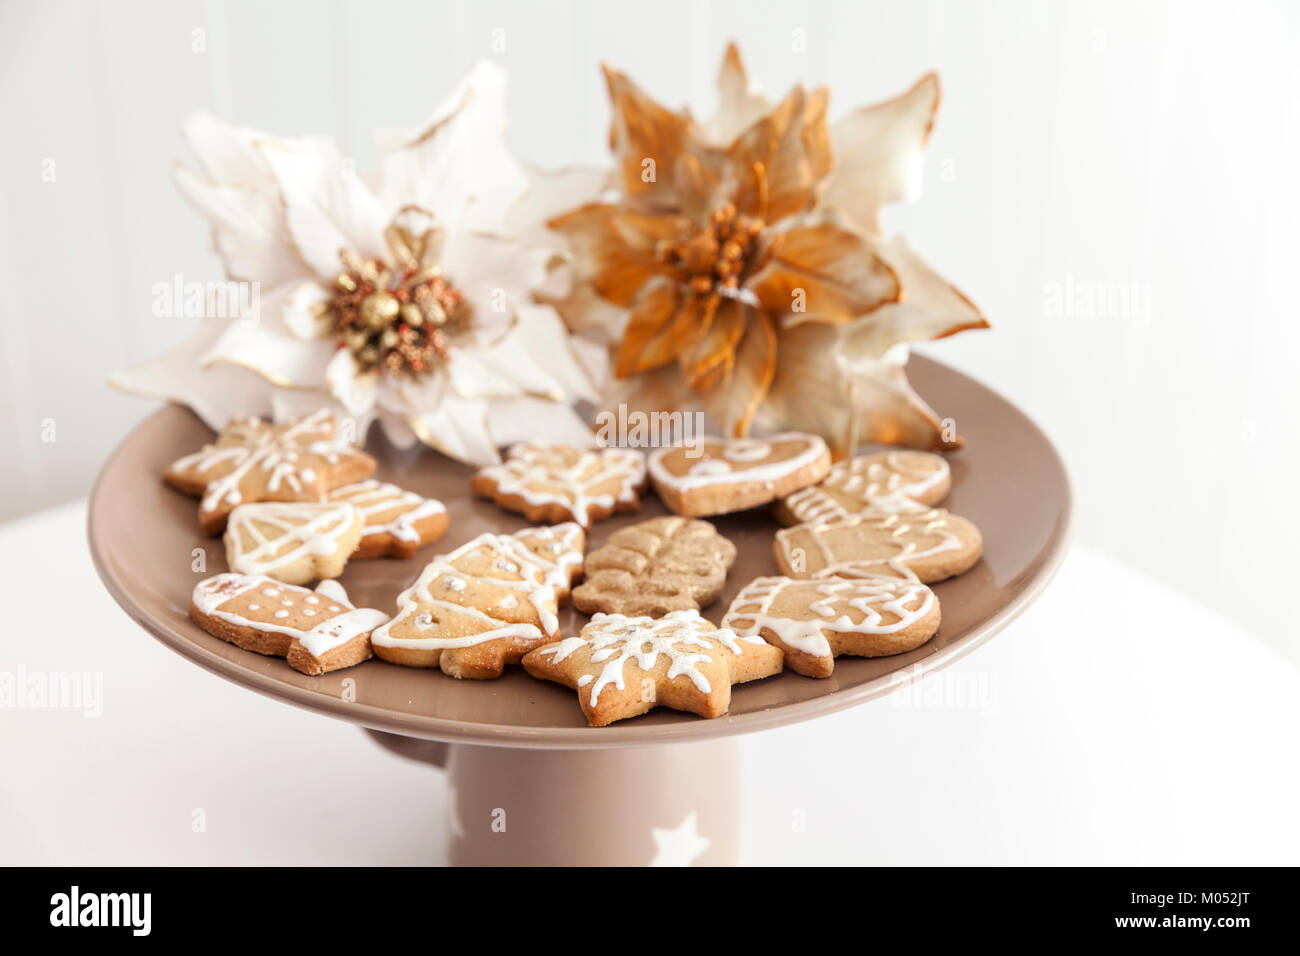 gingerbread cookies on a plate with Christmas motifs, close up Stock Photo